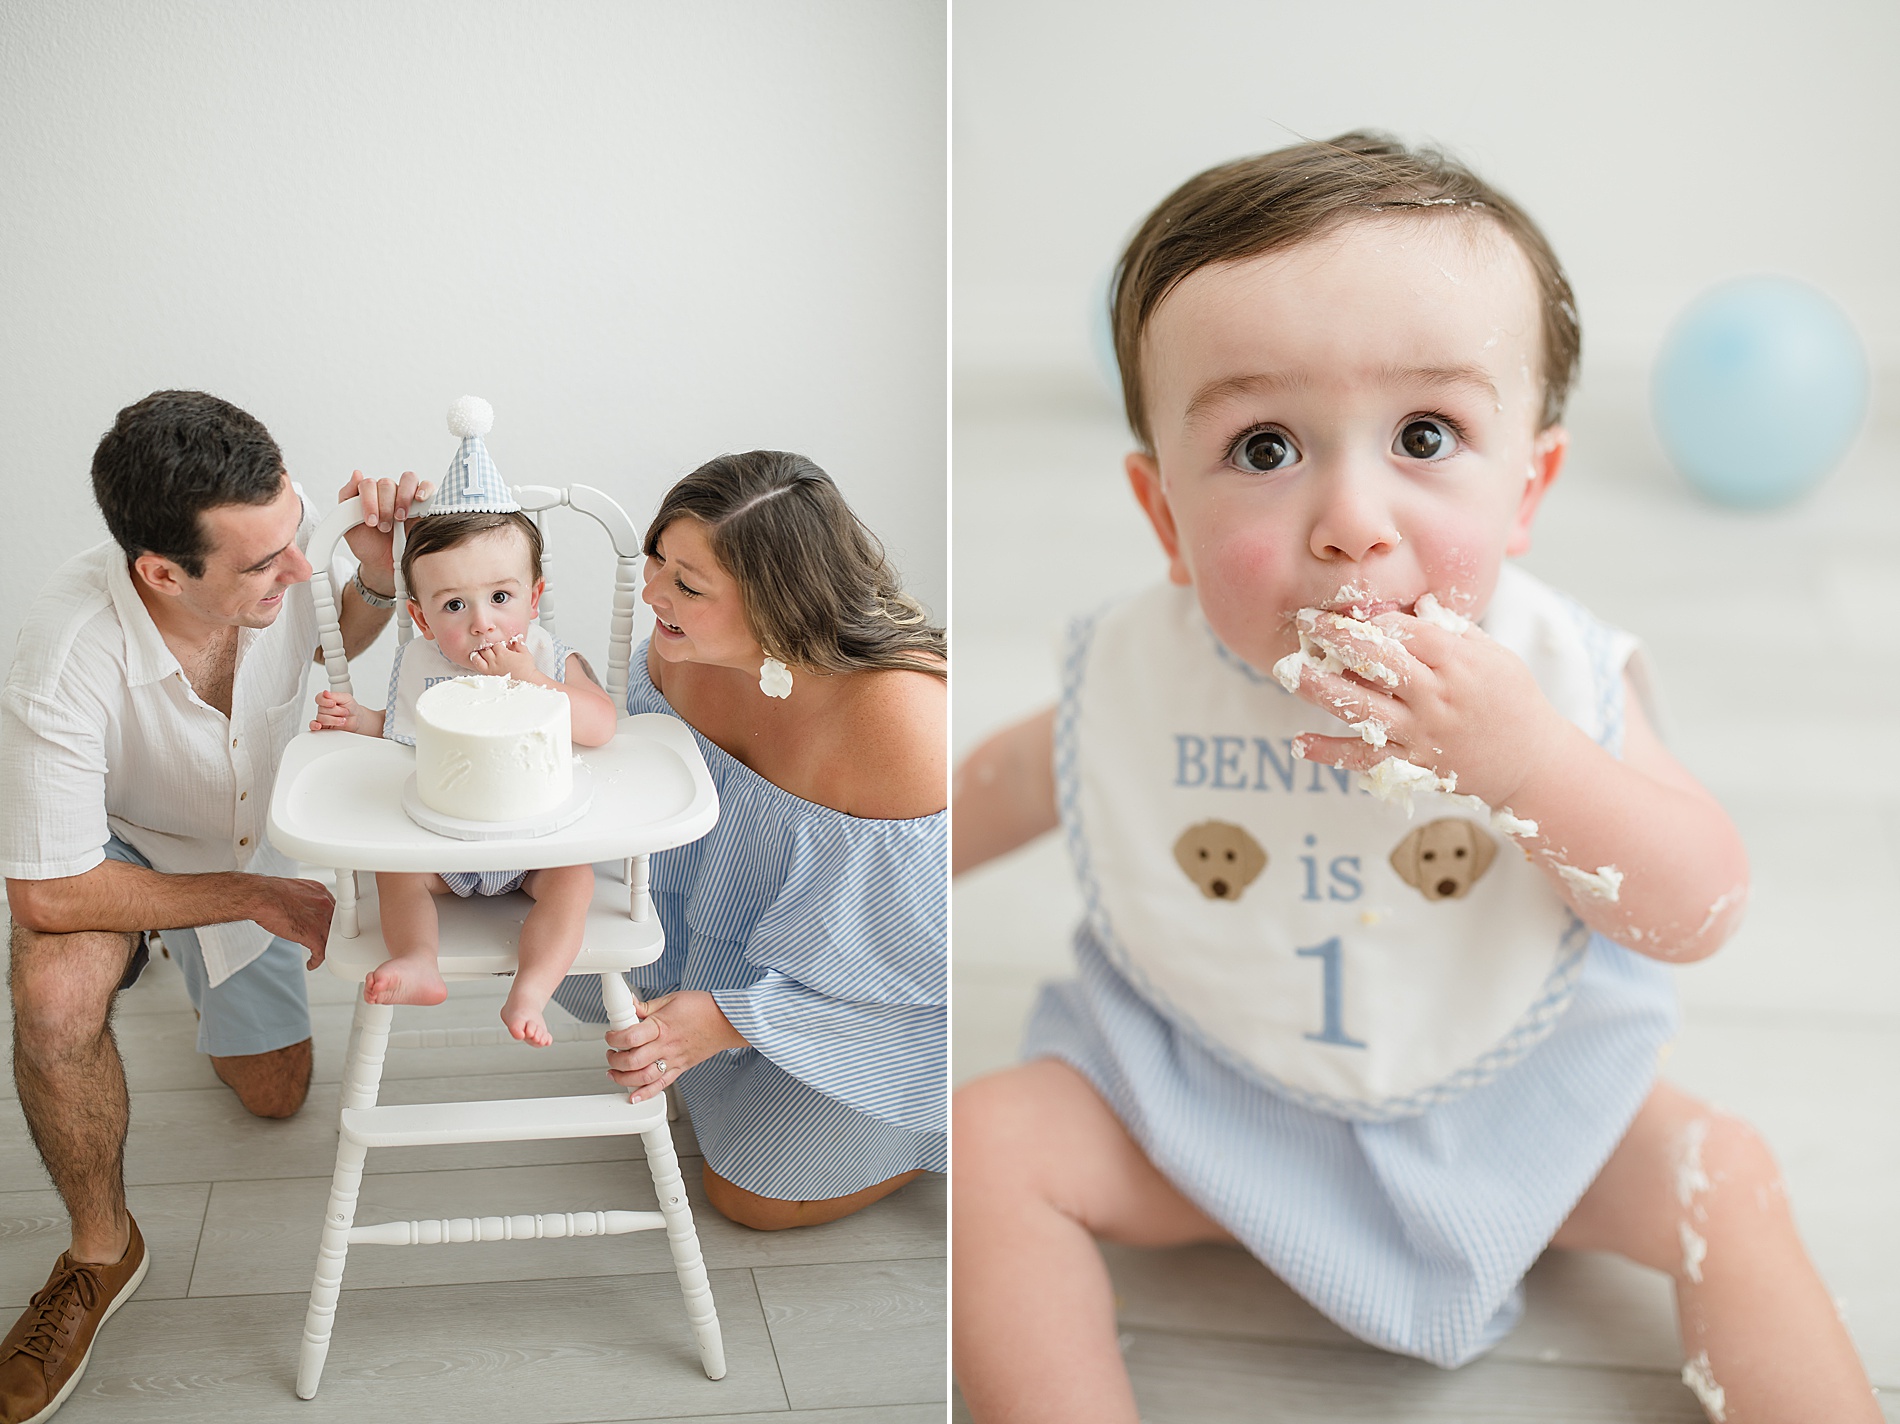 cake smash session photographed by Lindsey Dutton Photography, a Dallas newborn photographer
